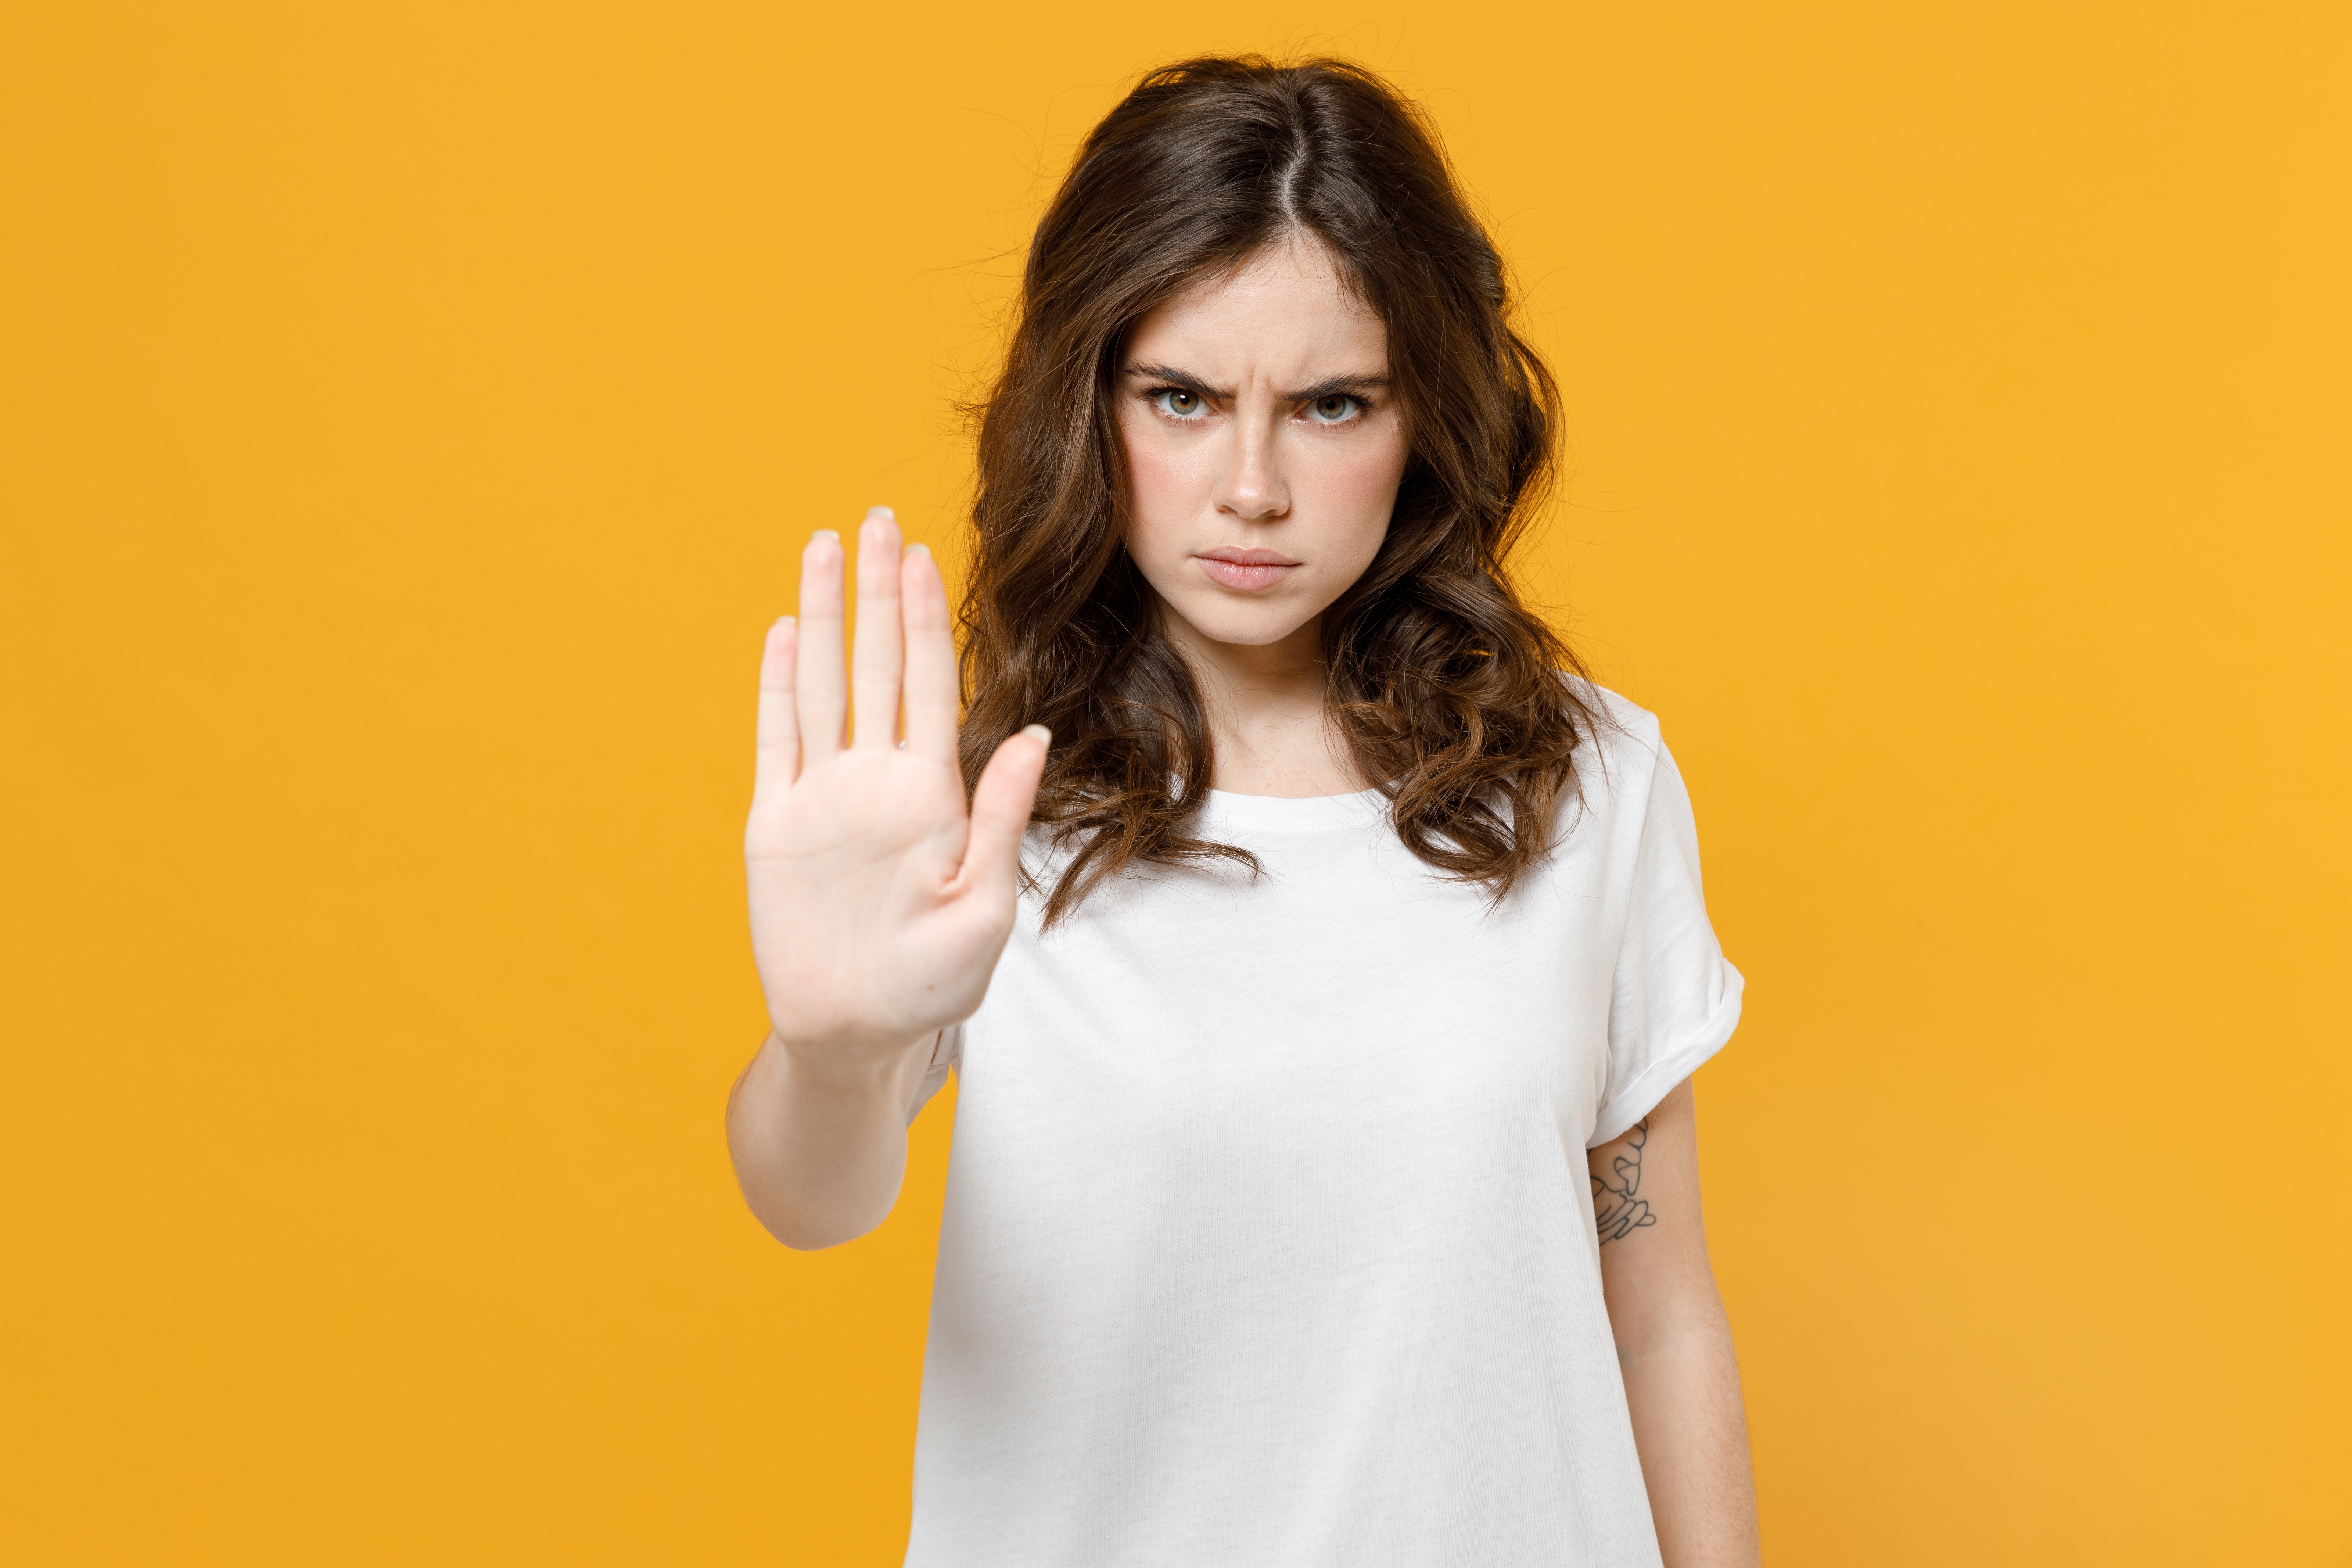 An angry young girl signaling to stop | Source: Shutterstock